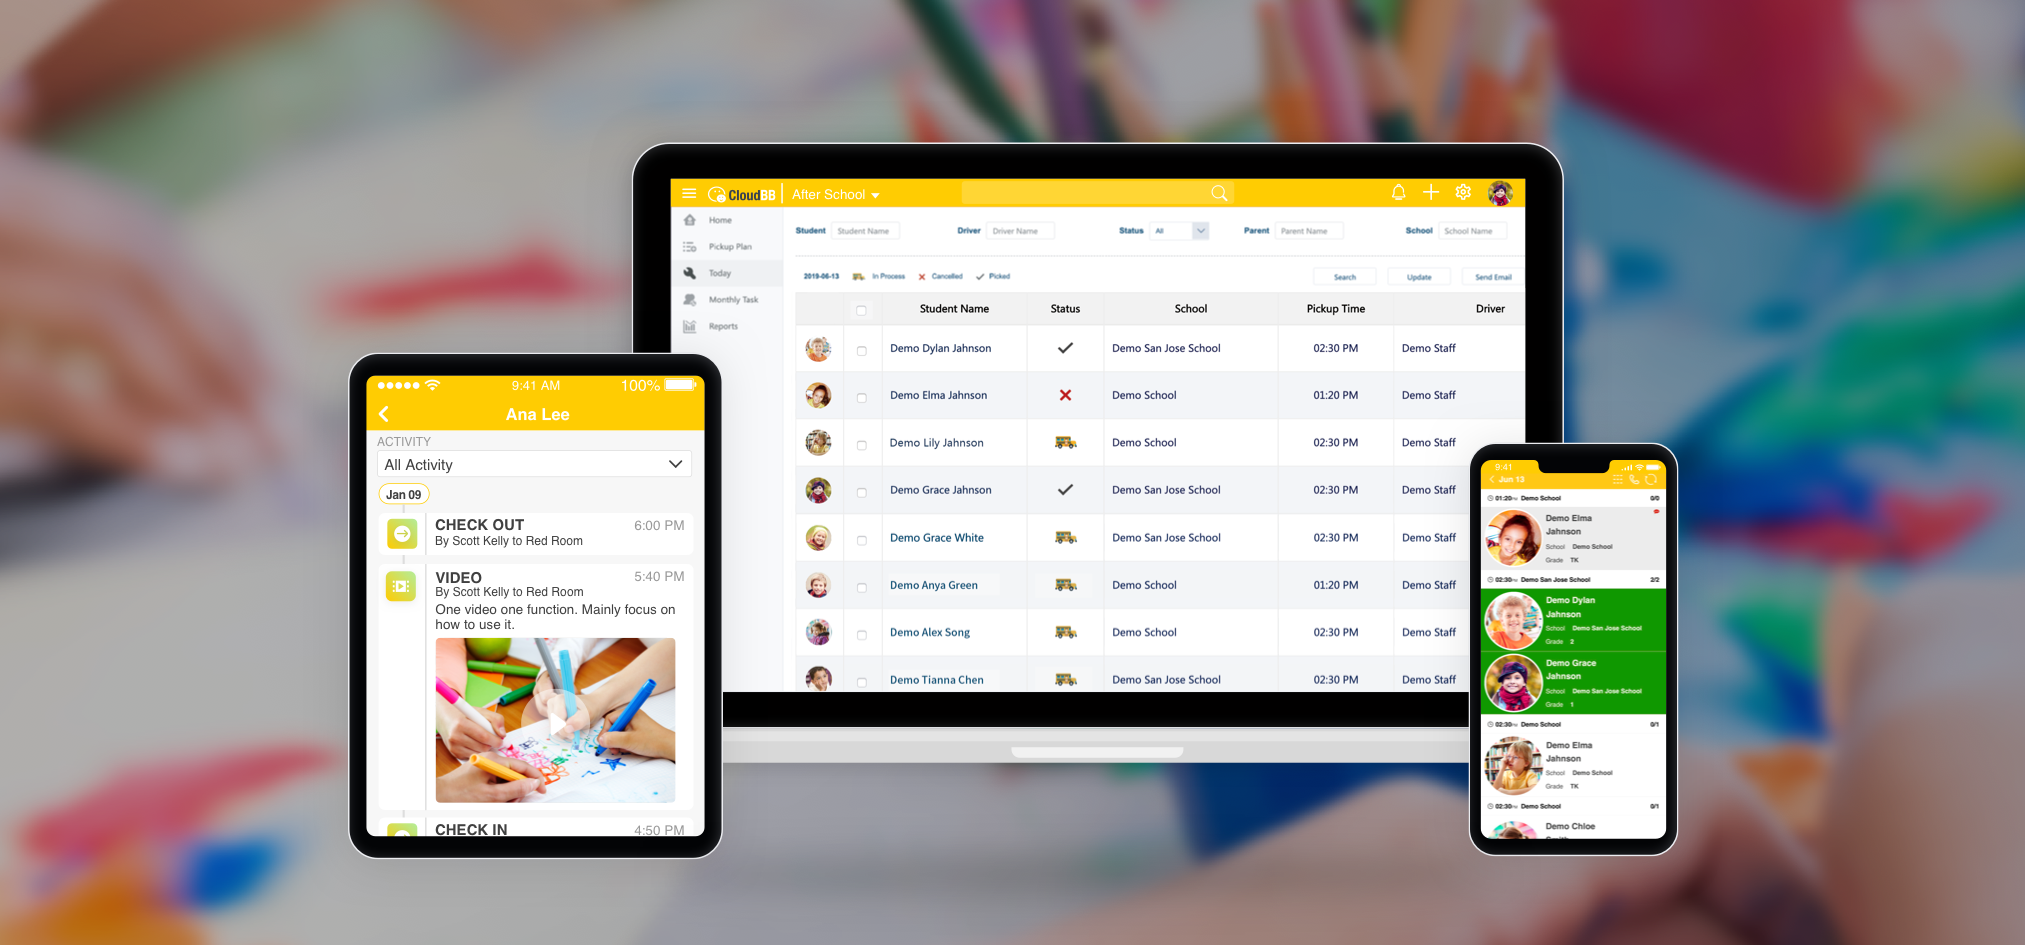 CloudBB launched childcare management software